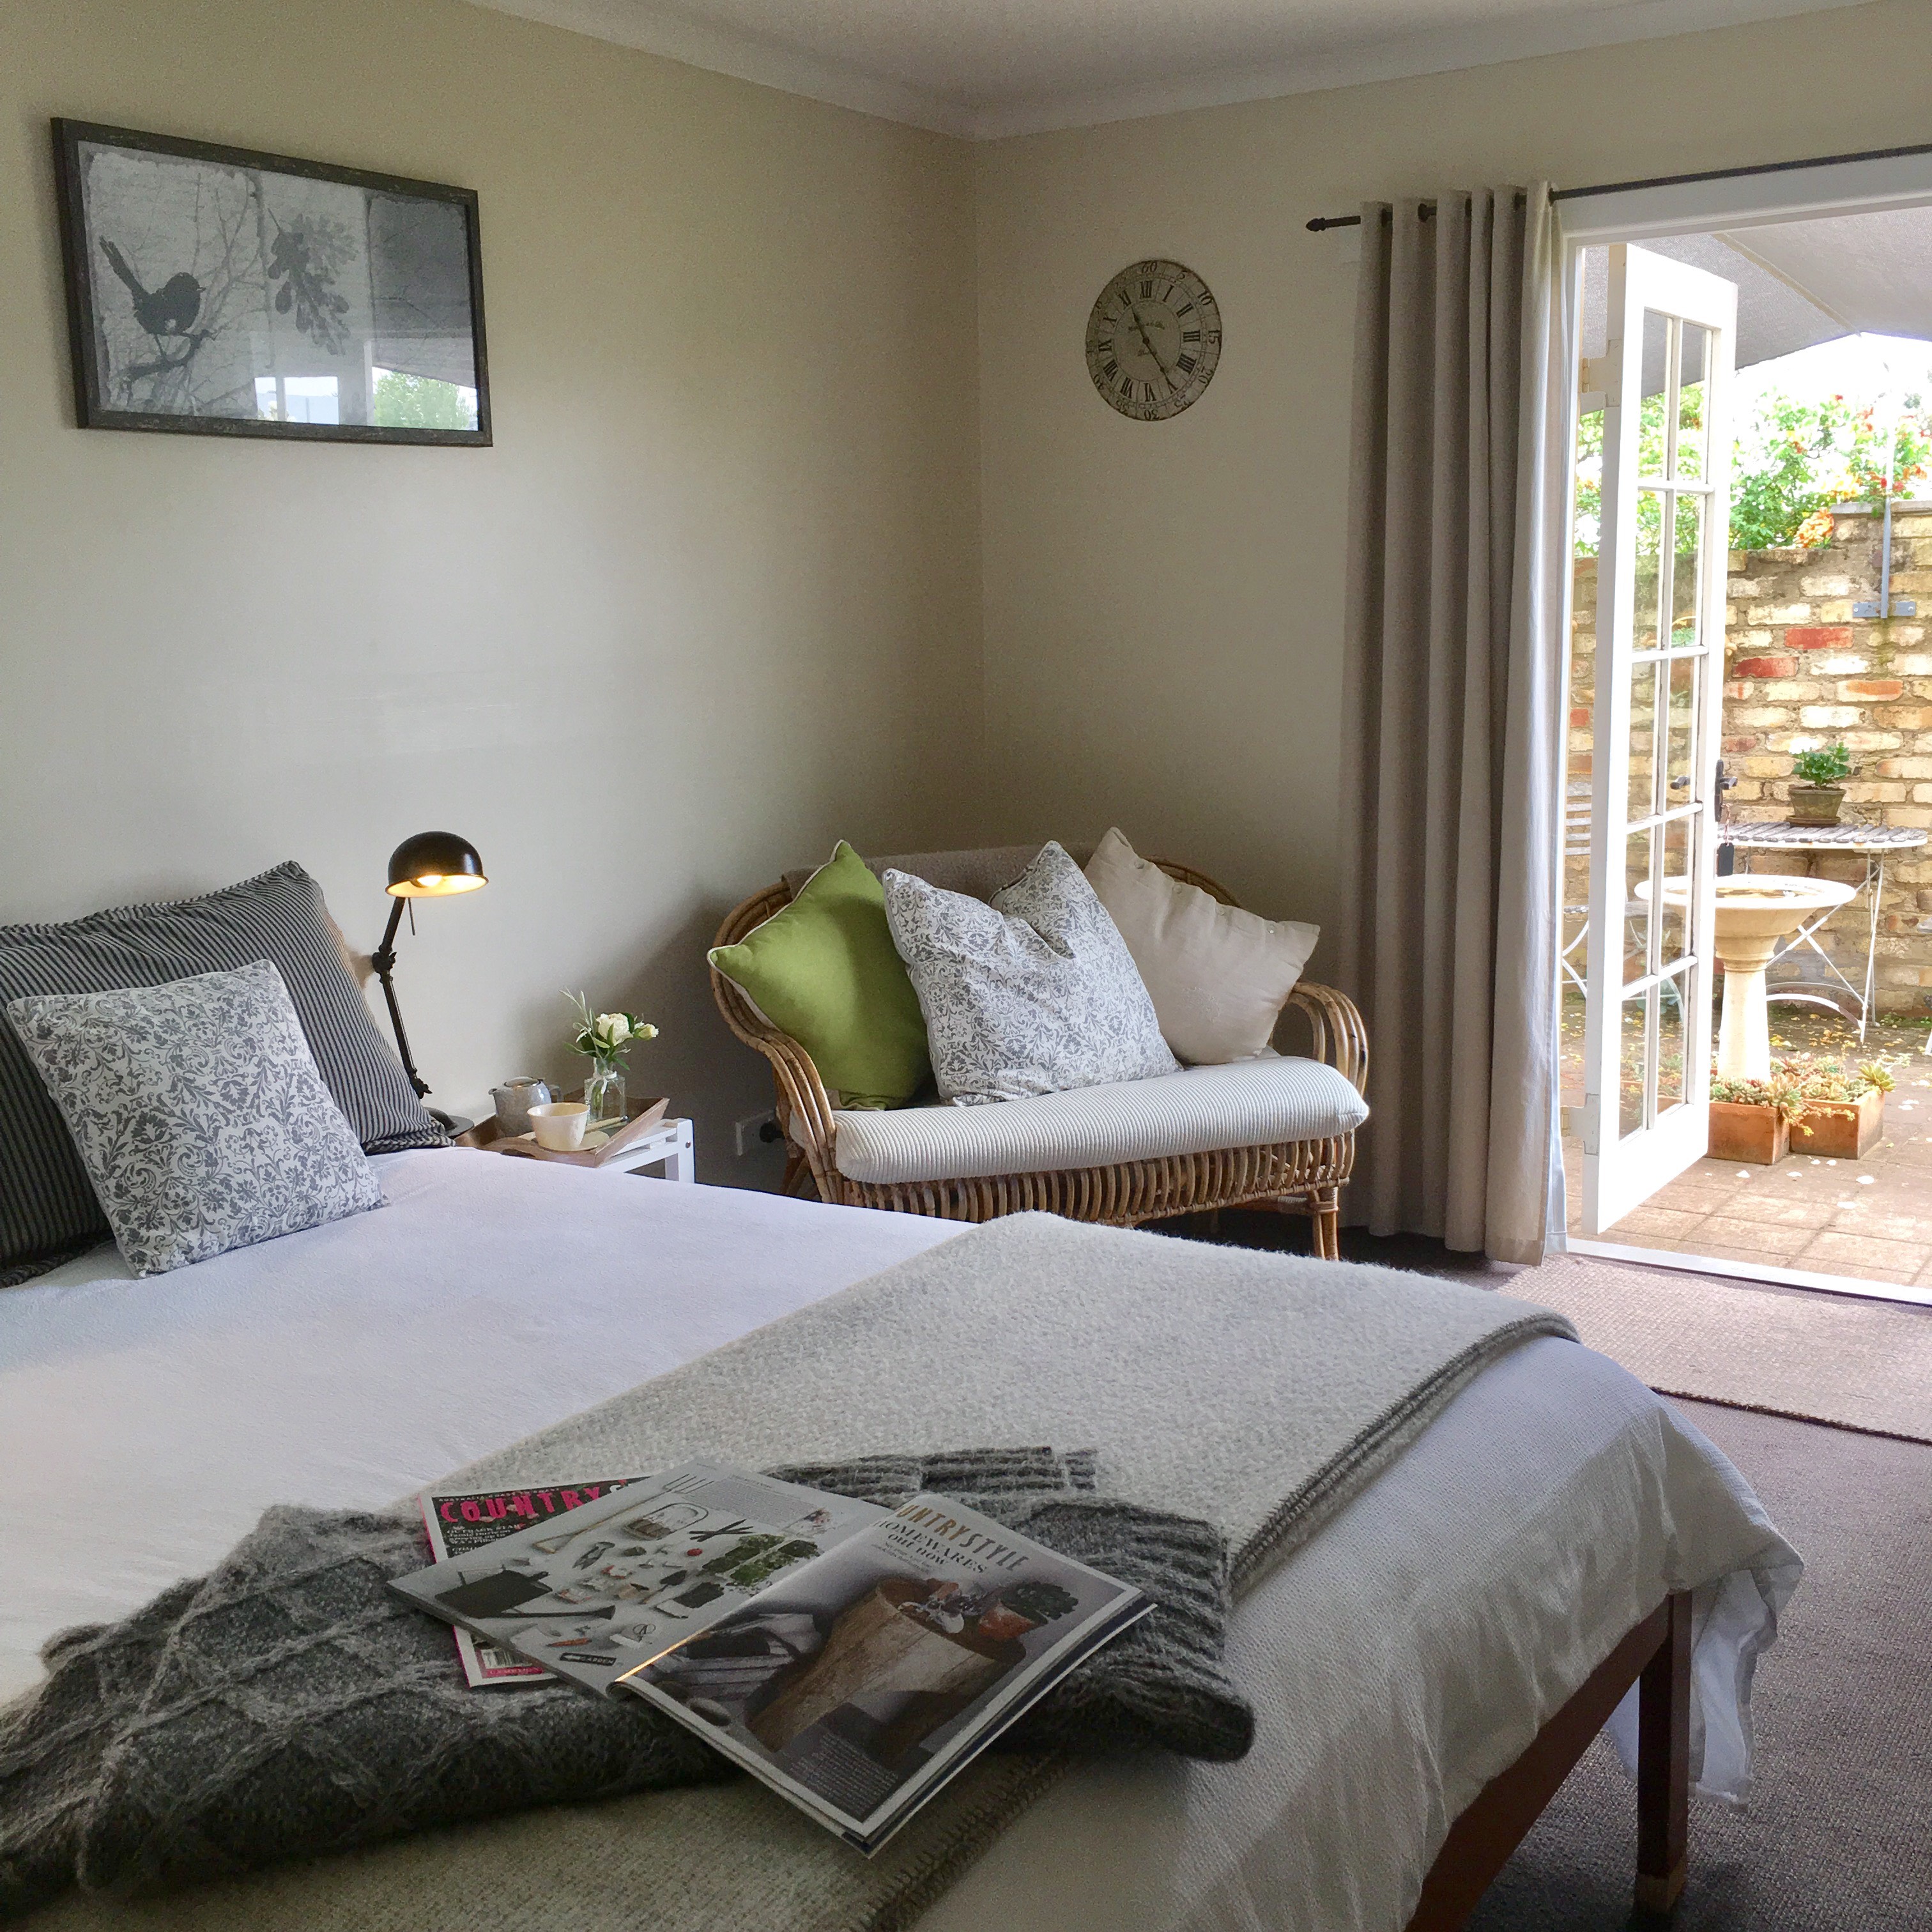 Aggies Bed and Breakfast - Kempsey Accommodation